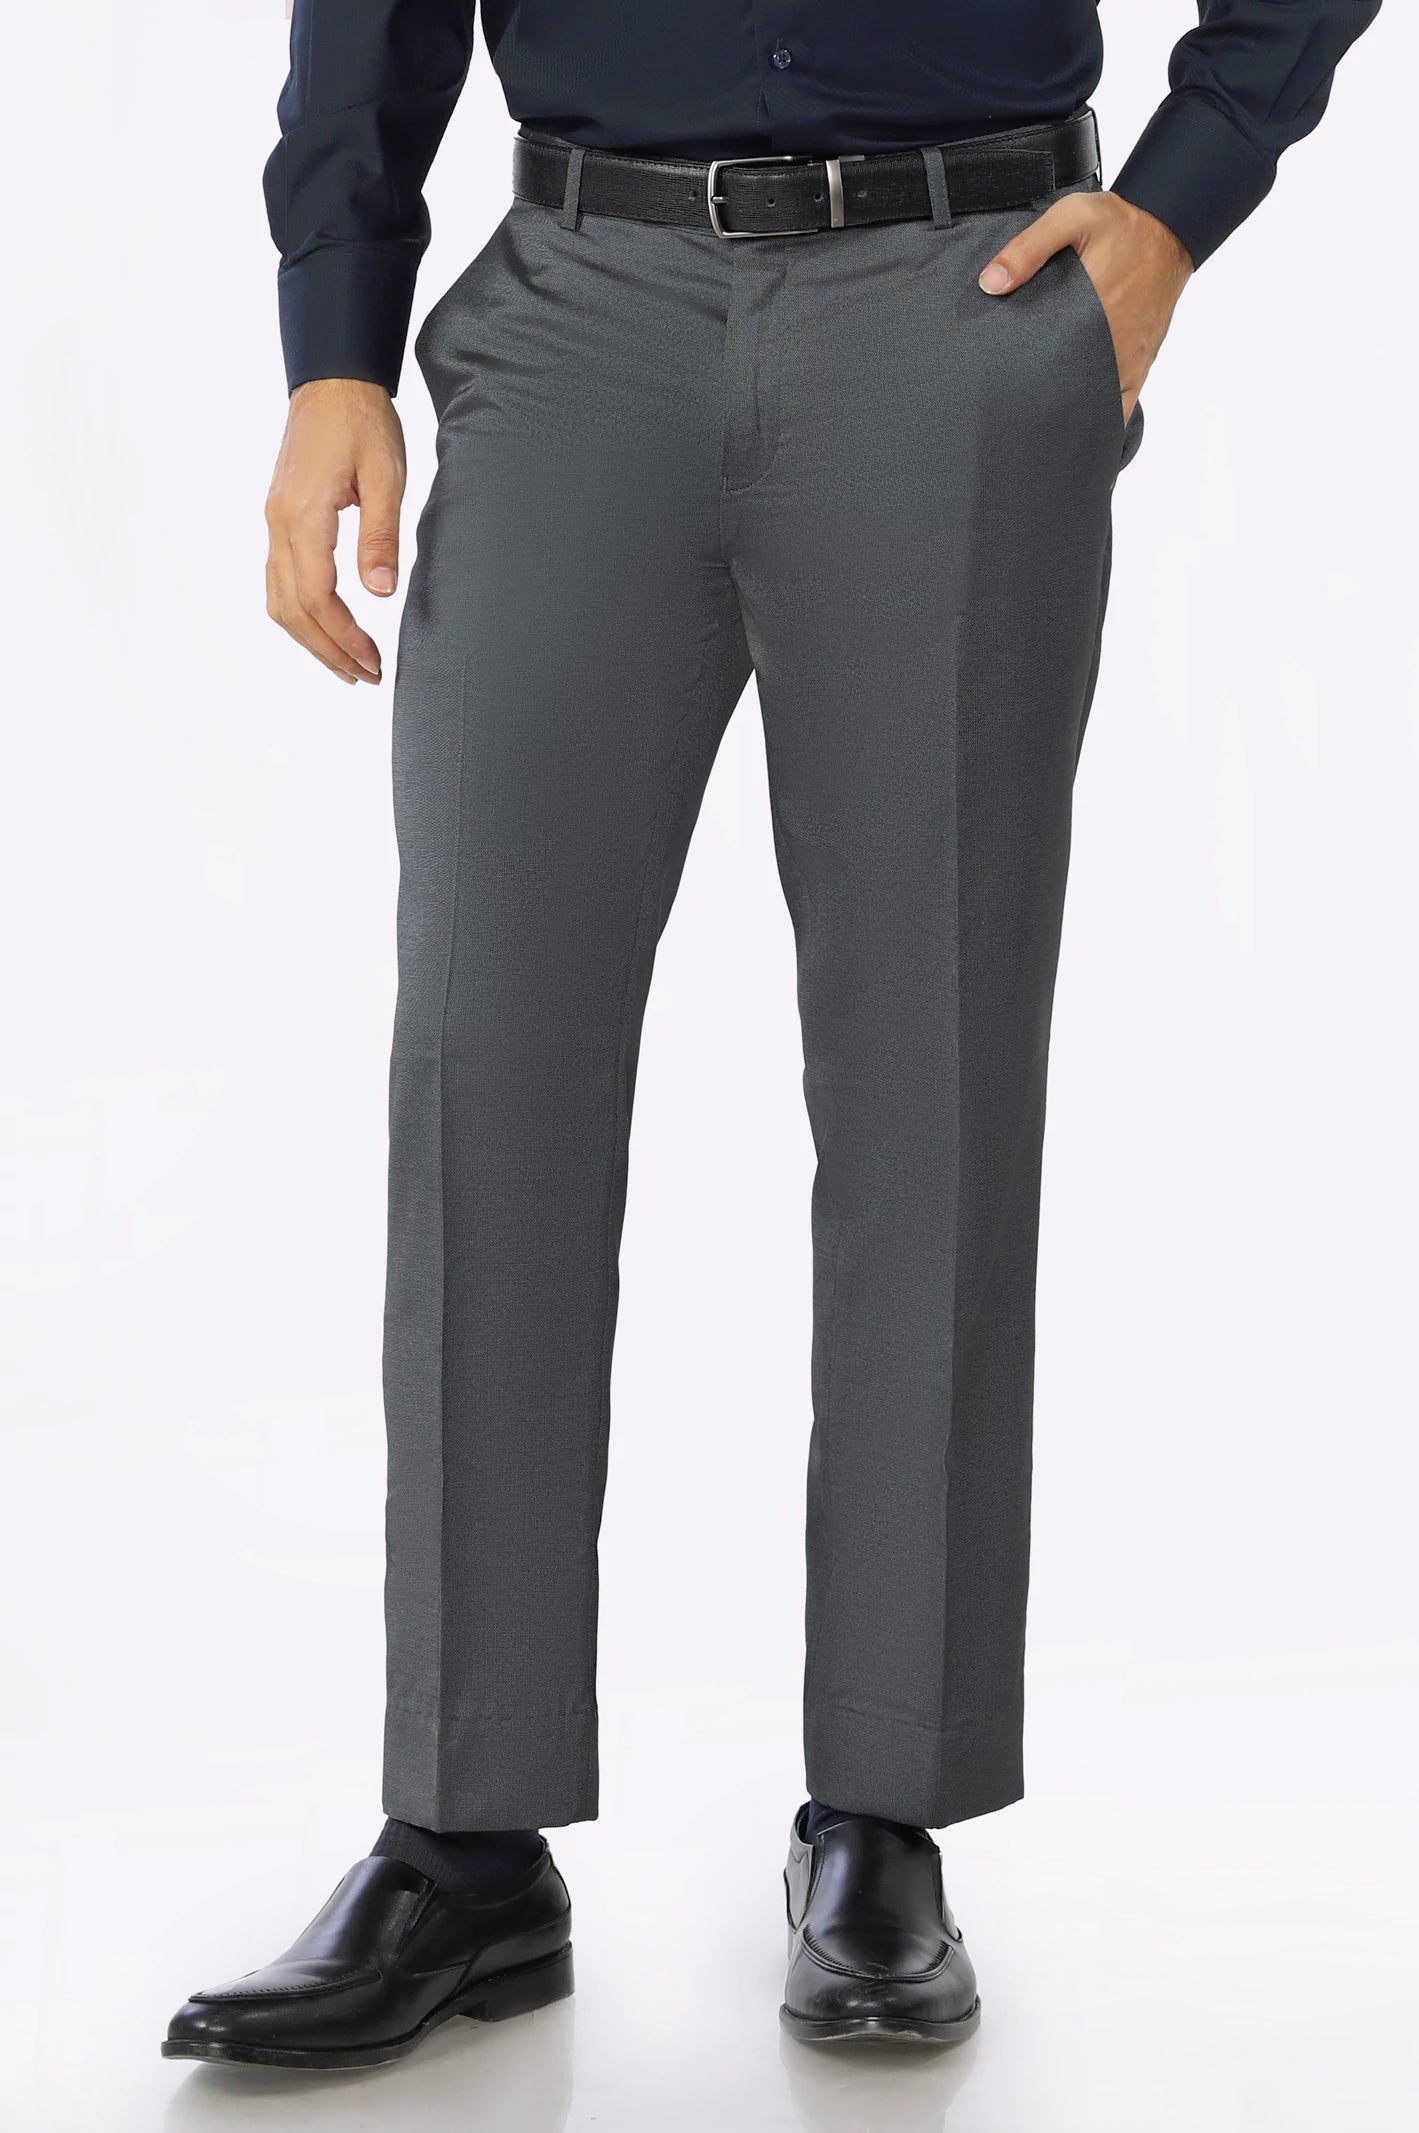 Luxury Smart Fit Formal Trouser From Diners